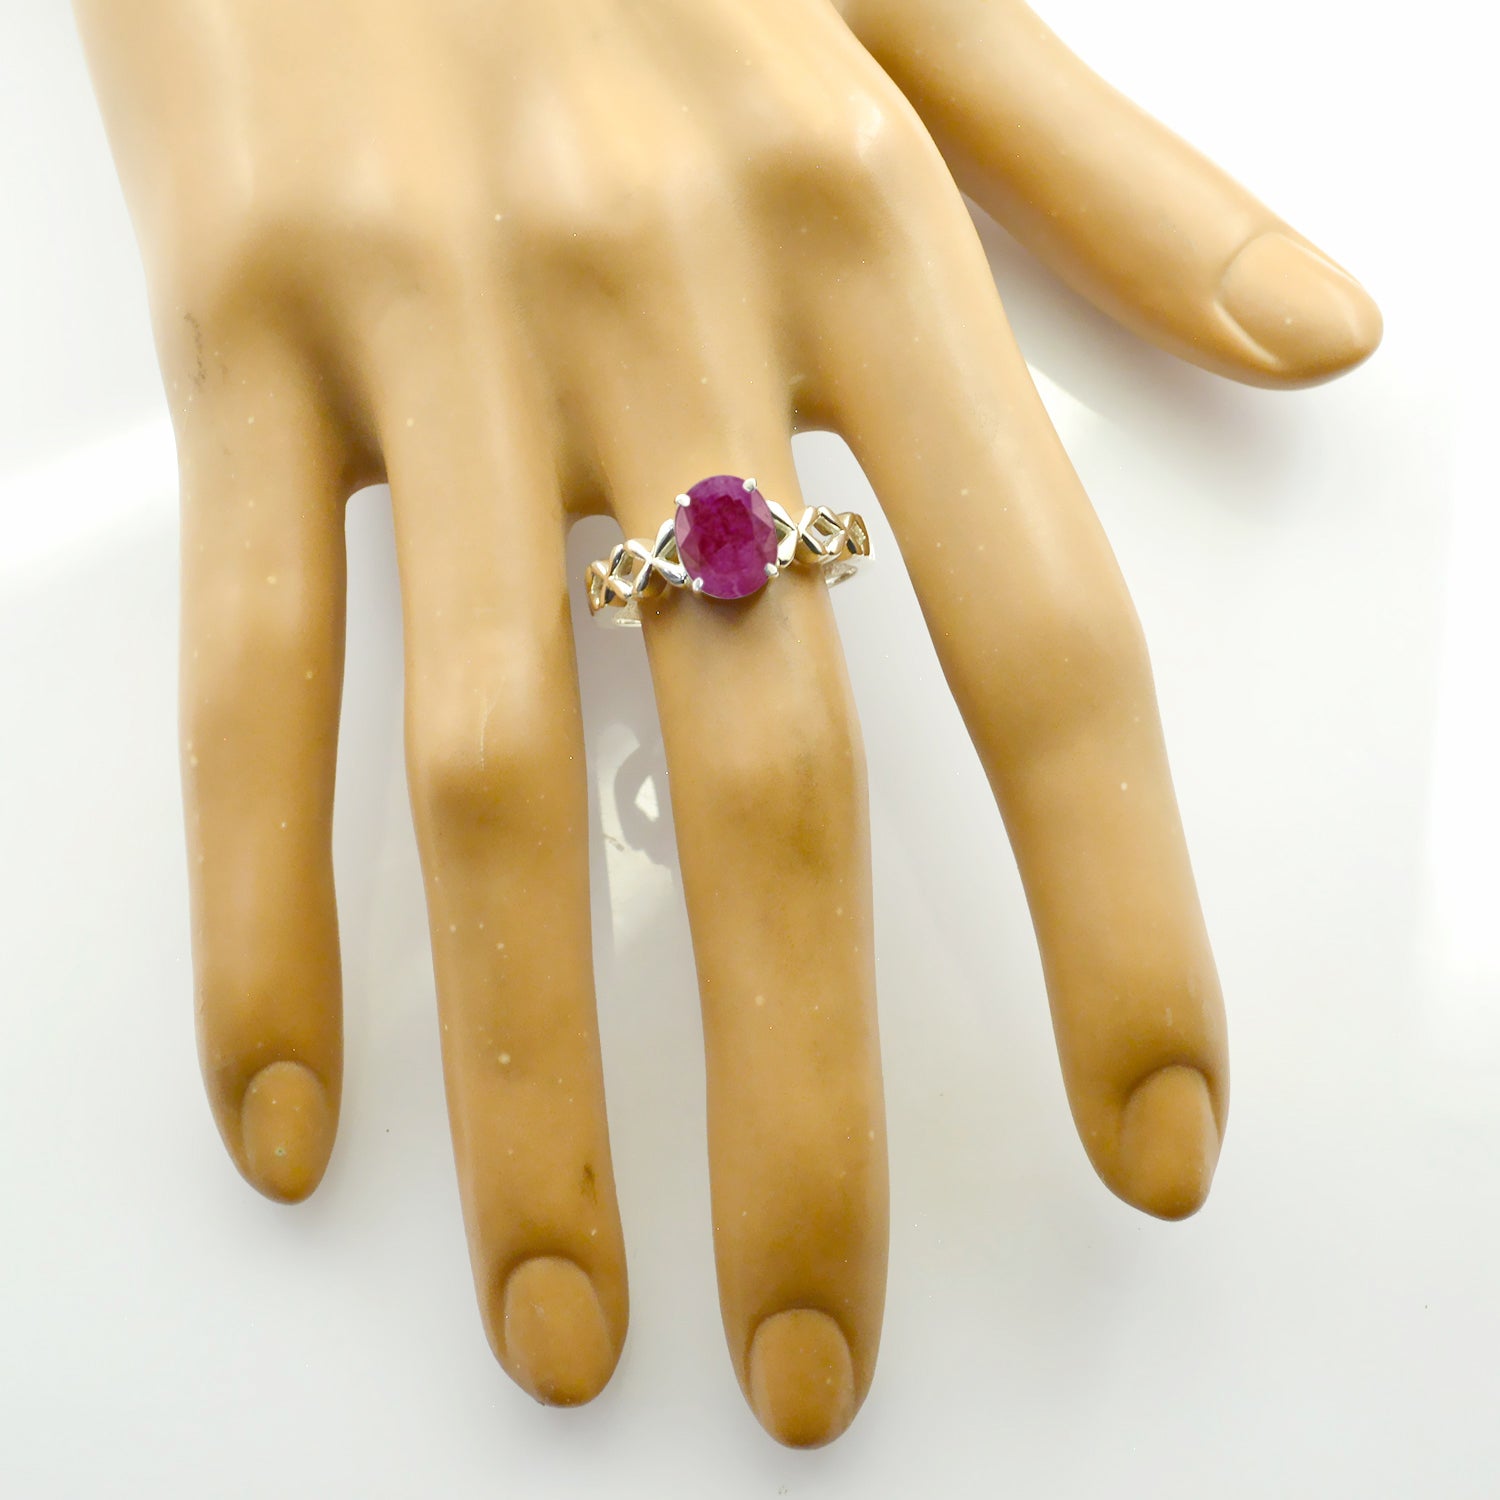 Riyo Delicate Stone Indianruby Solid Silver Ring Jewelry Packaging